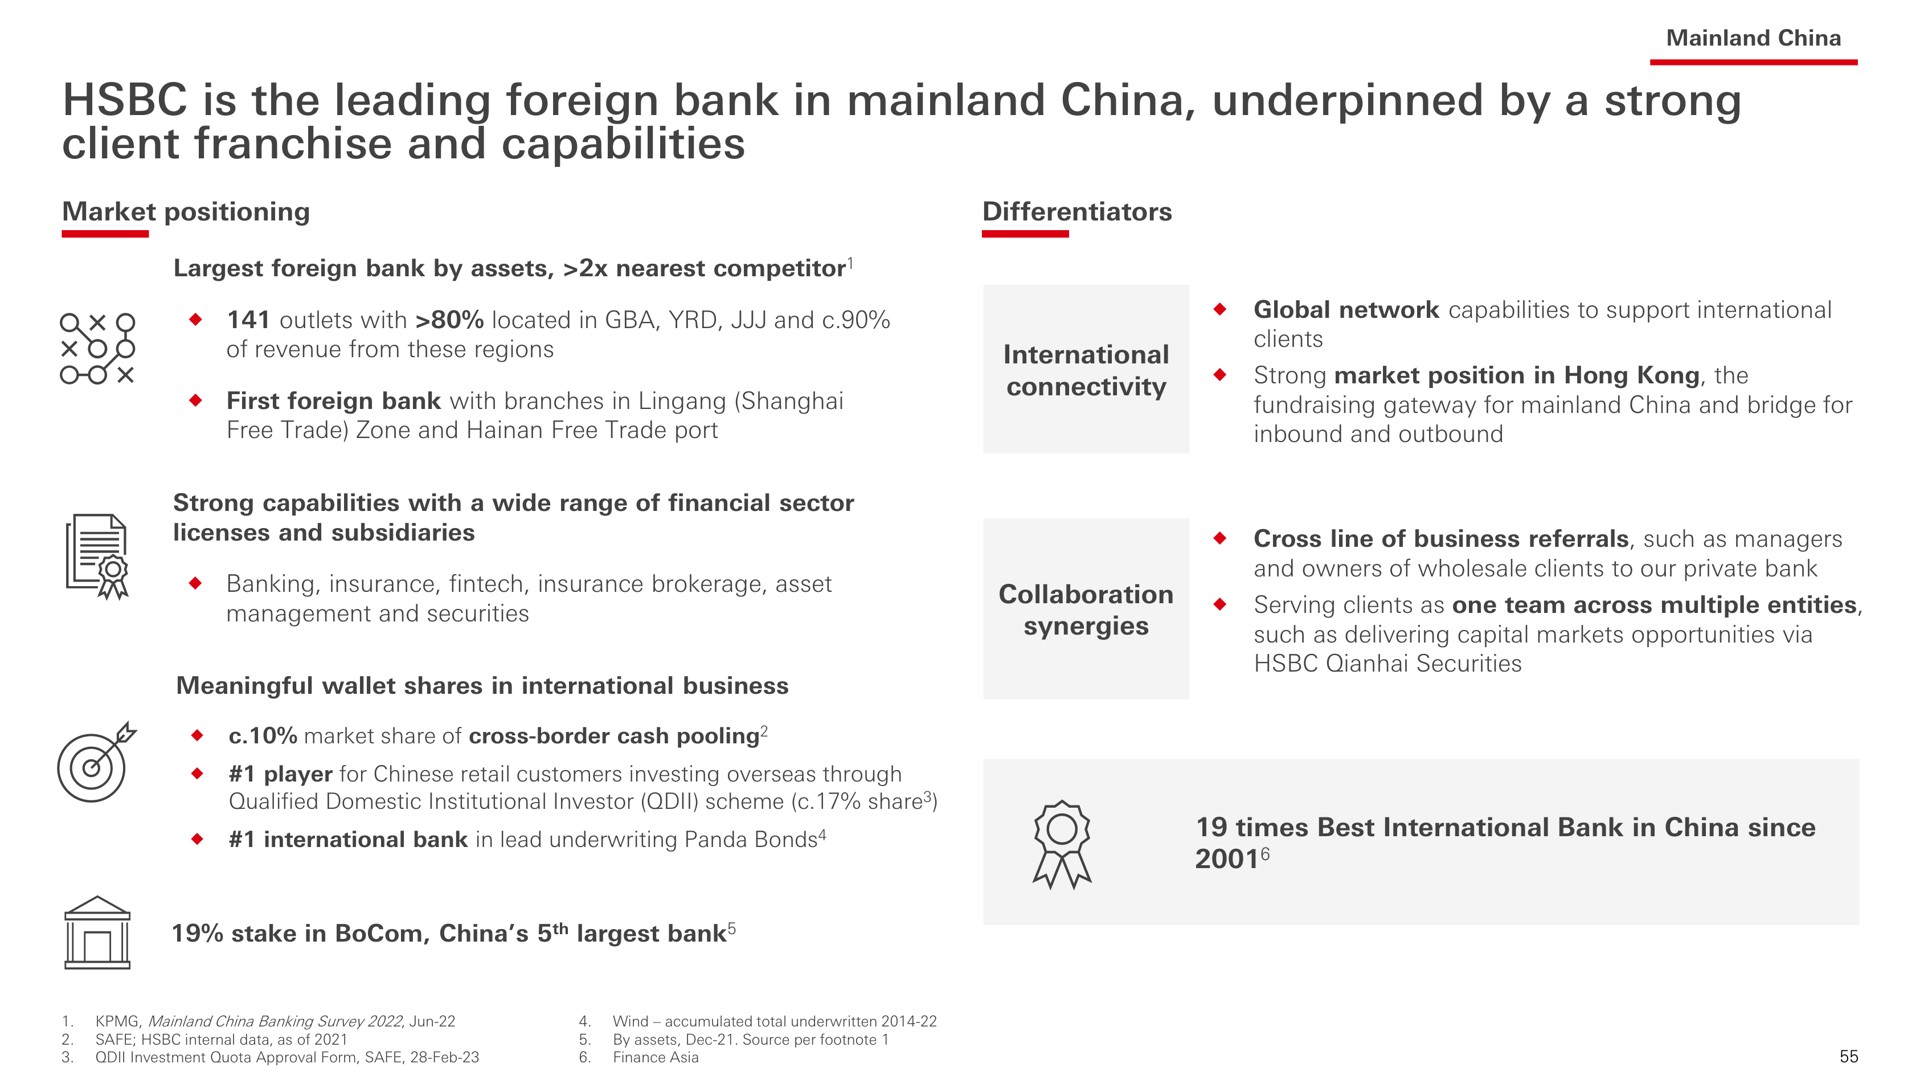 is the leading foreign bank in china underpinned by a strong client franchise and capabilities | HSBC